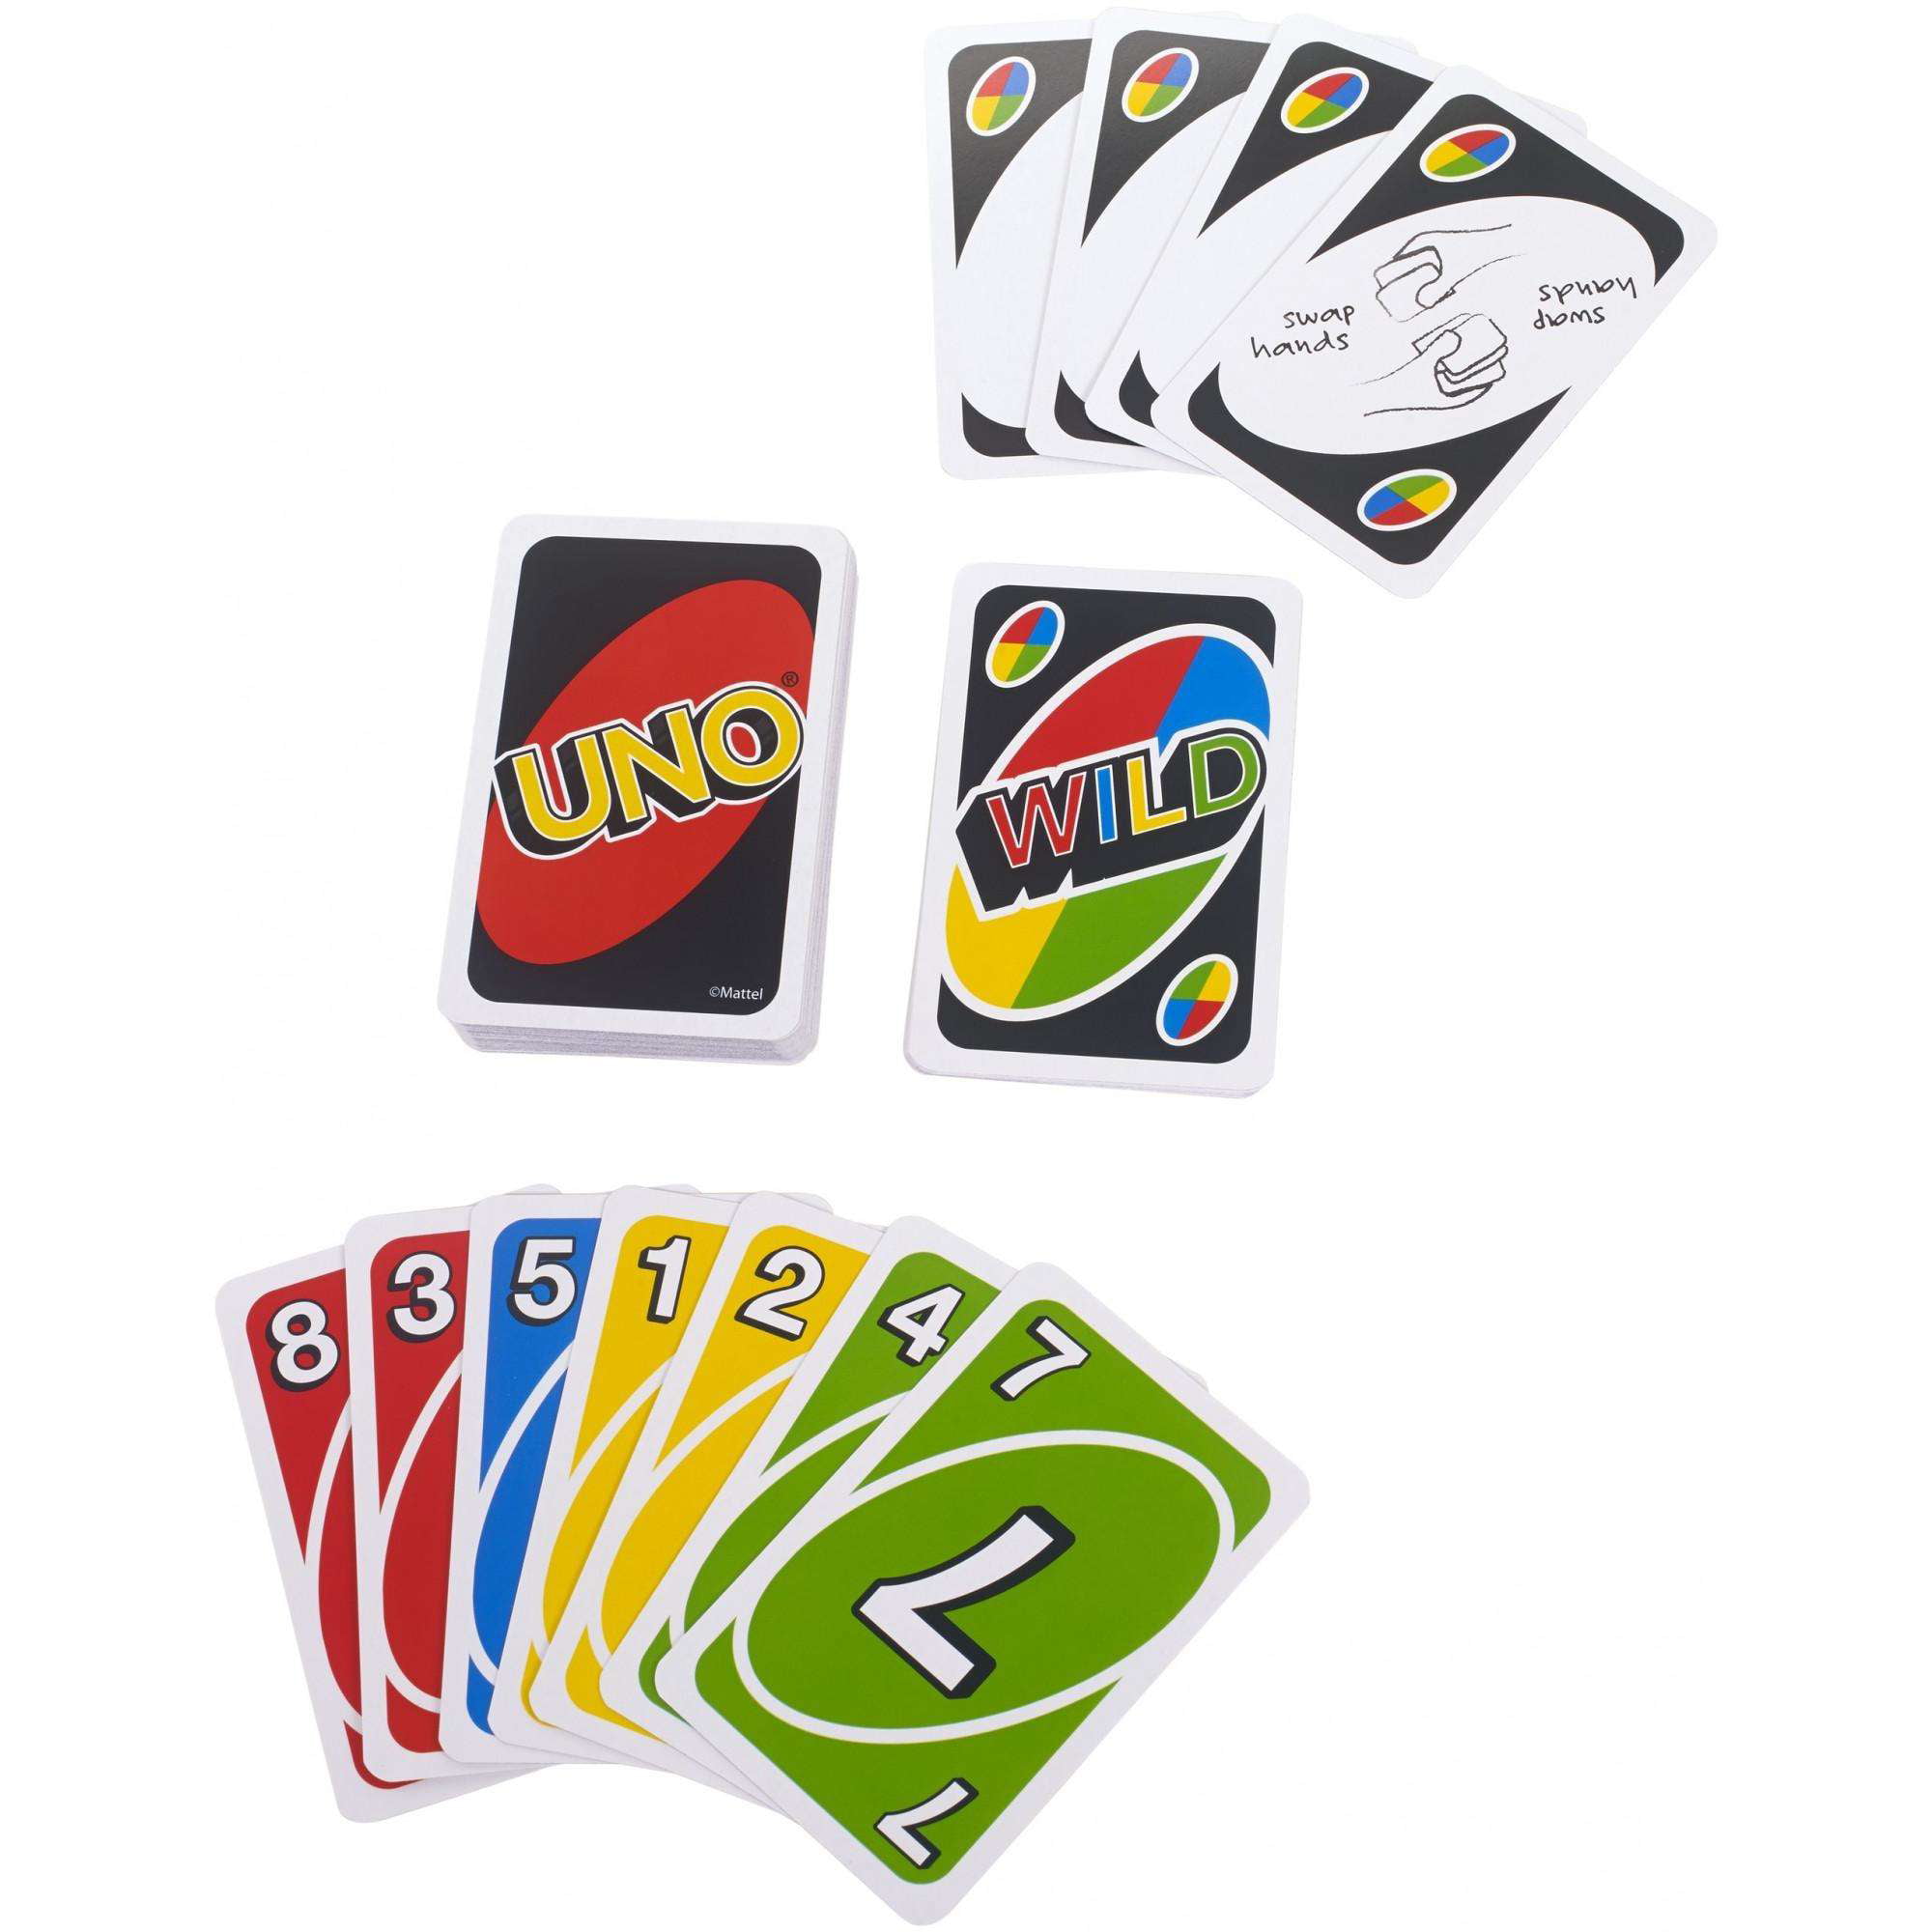 UNO UNOcorns Matching Card Game for 2-10 Players